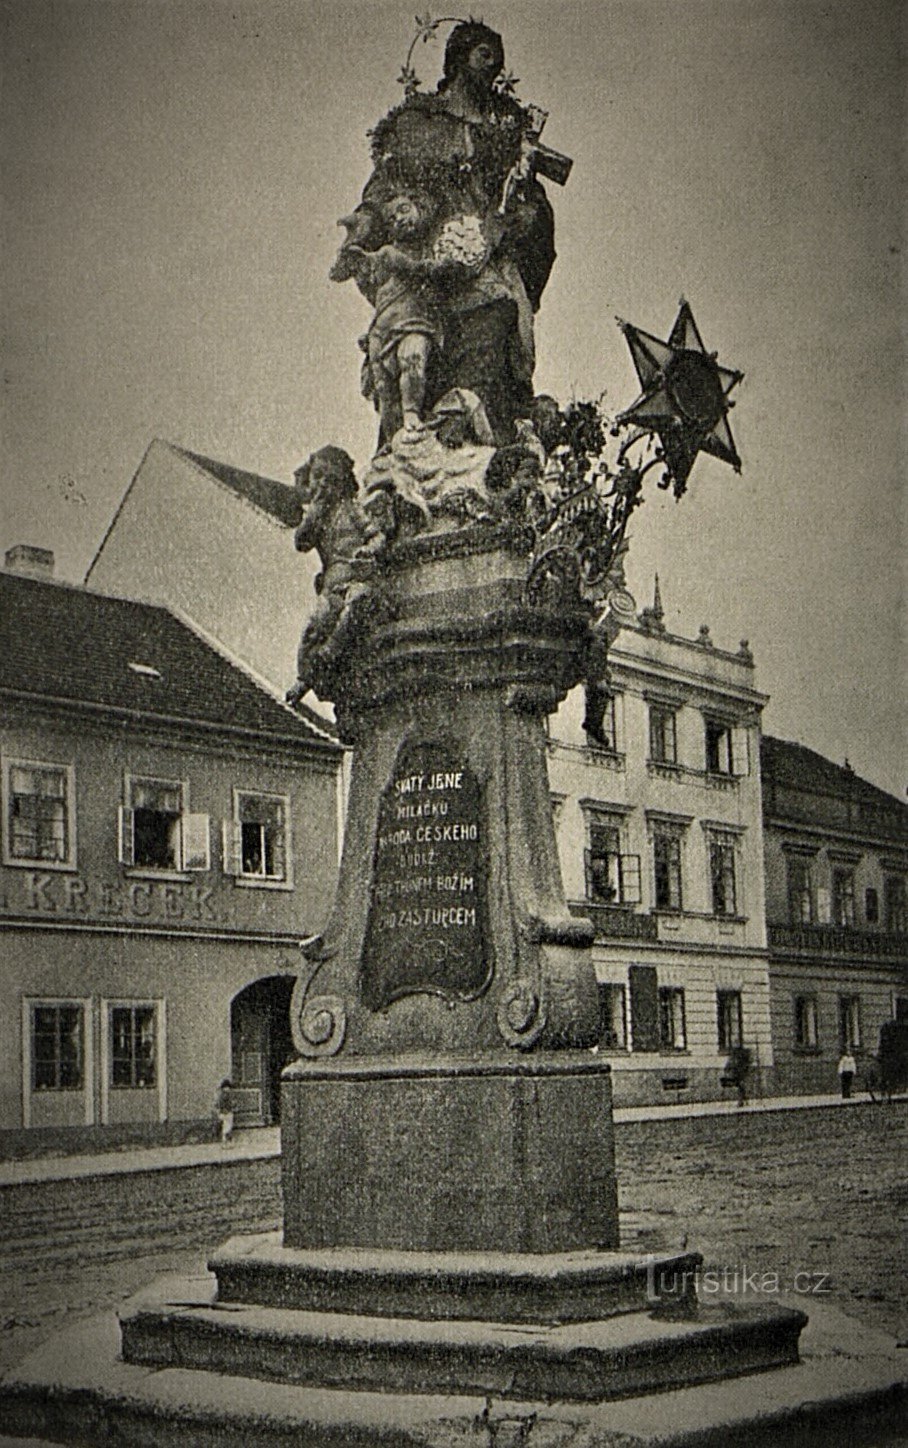 The original location of the statue of St. John of Nepomuck on the square in Česká Skalica (before 1910)